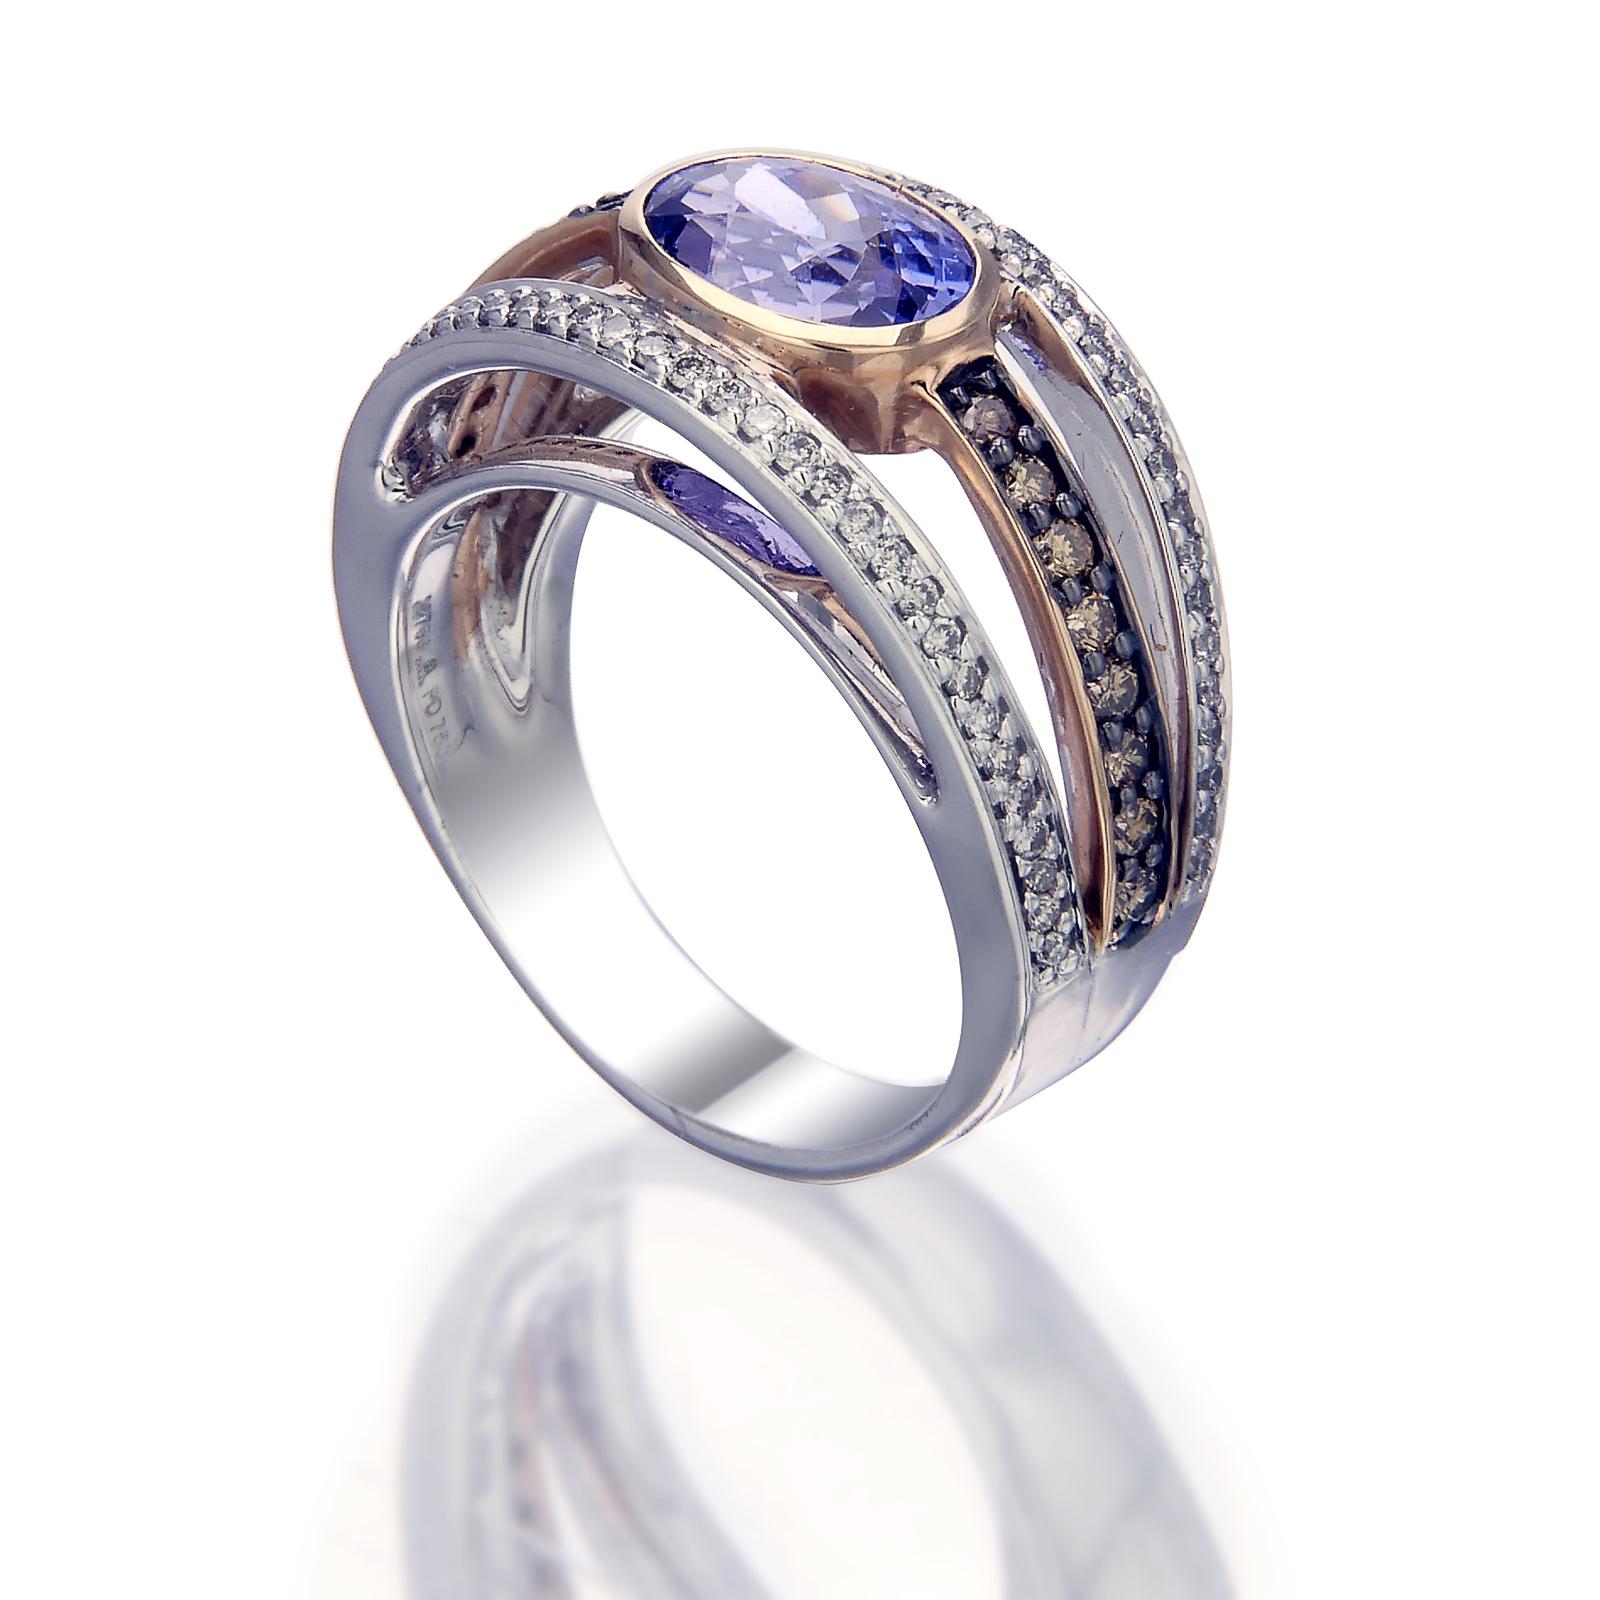 An impressive palladium and 18k rose gold ring with the warm glow of a 2.65-carat oval-shape tanzanite and lined with three rows of 0.36-carat white and 0.35-carat yellow diamonds. It’s a jewel that exhibits an understated elegance that can be worn